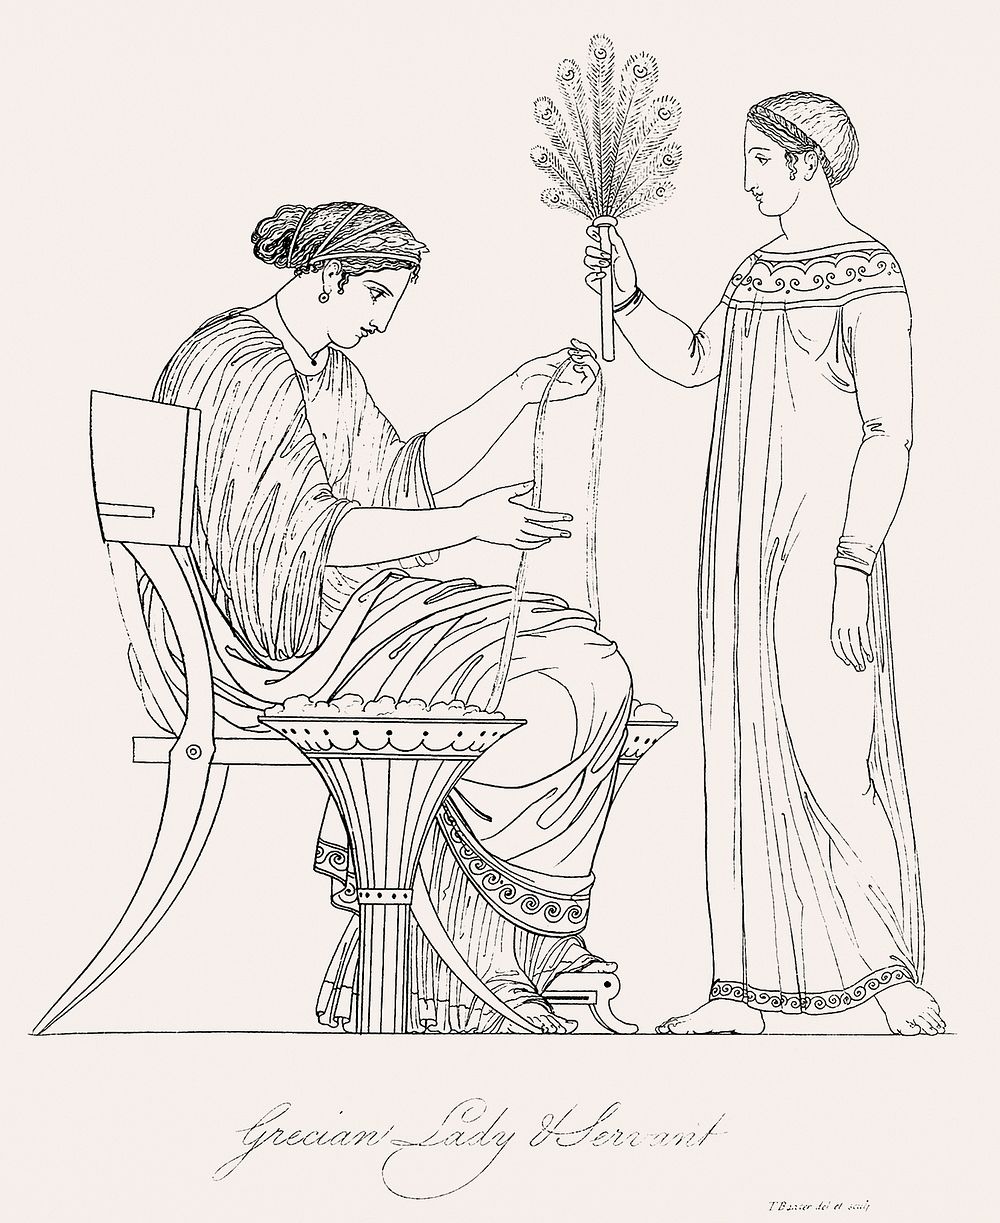 Grecian lady and servant from An illustration of the Egyptian, Grecian and Roman costumes by Thomas Baxter…